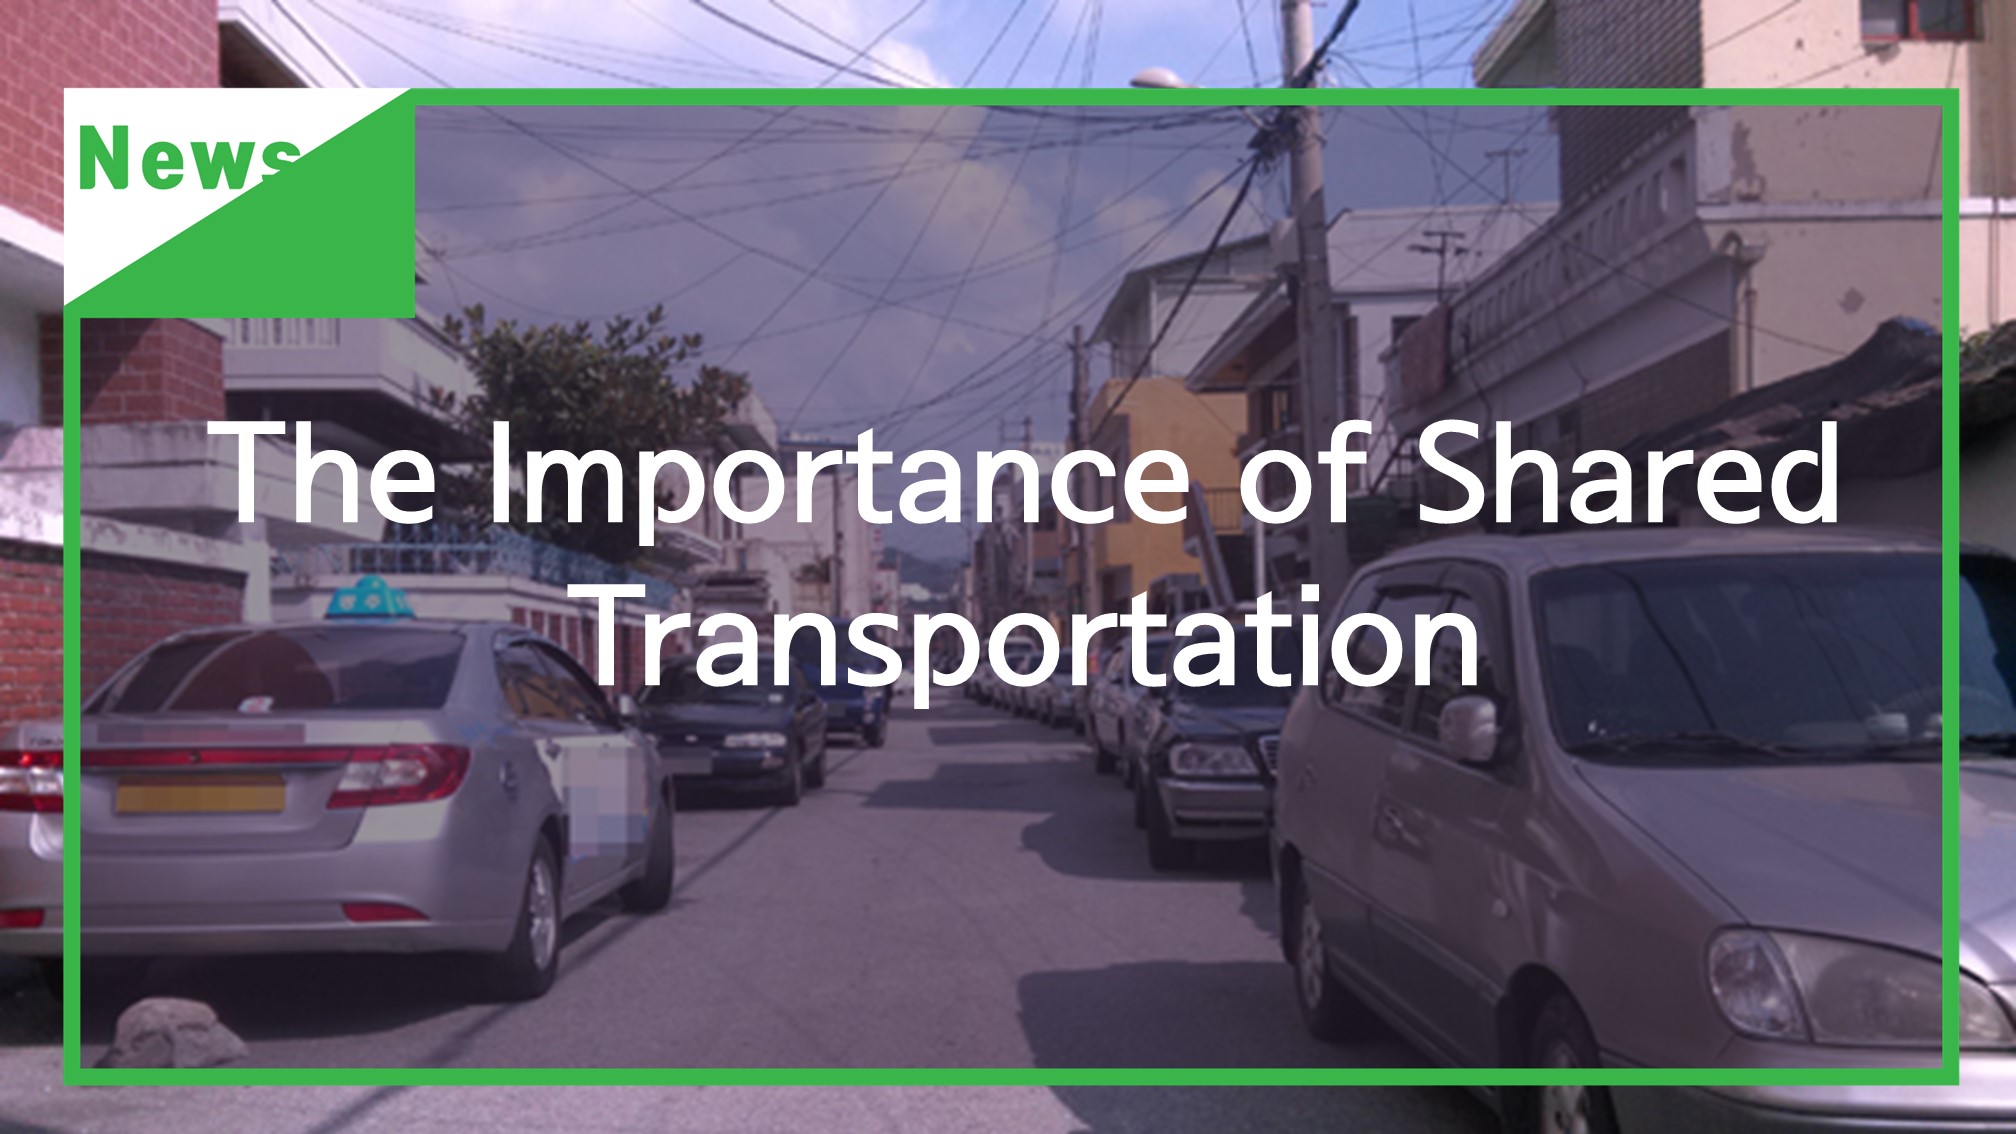 [Resources] The Importance of Shared Transportation